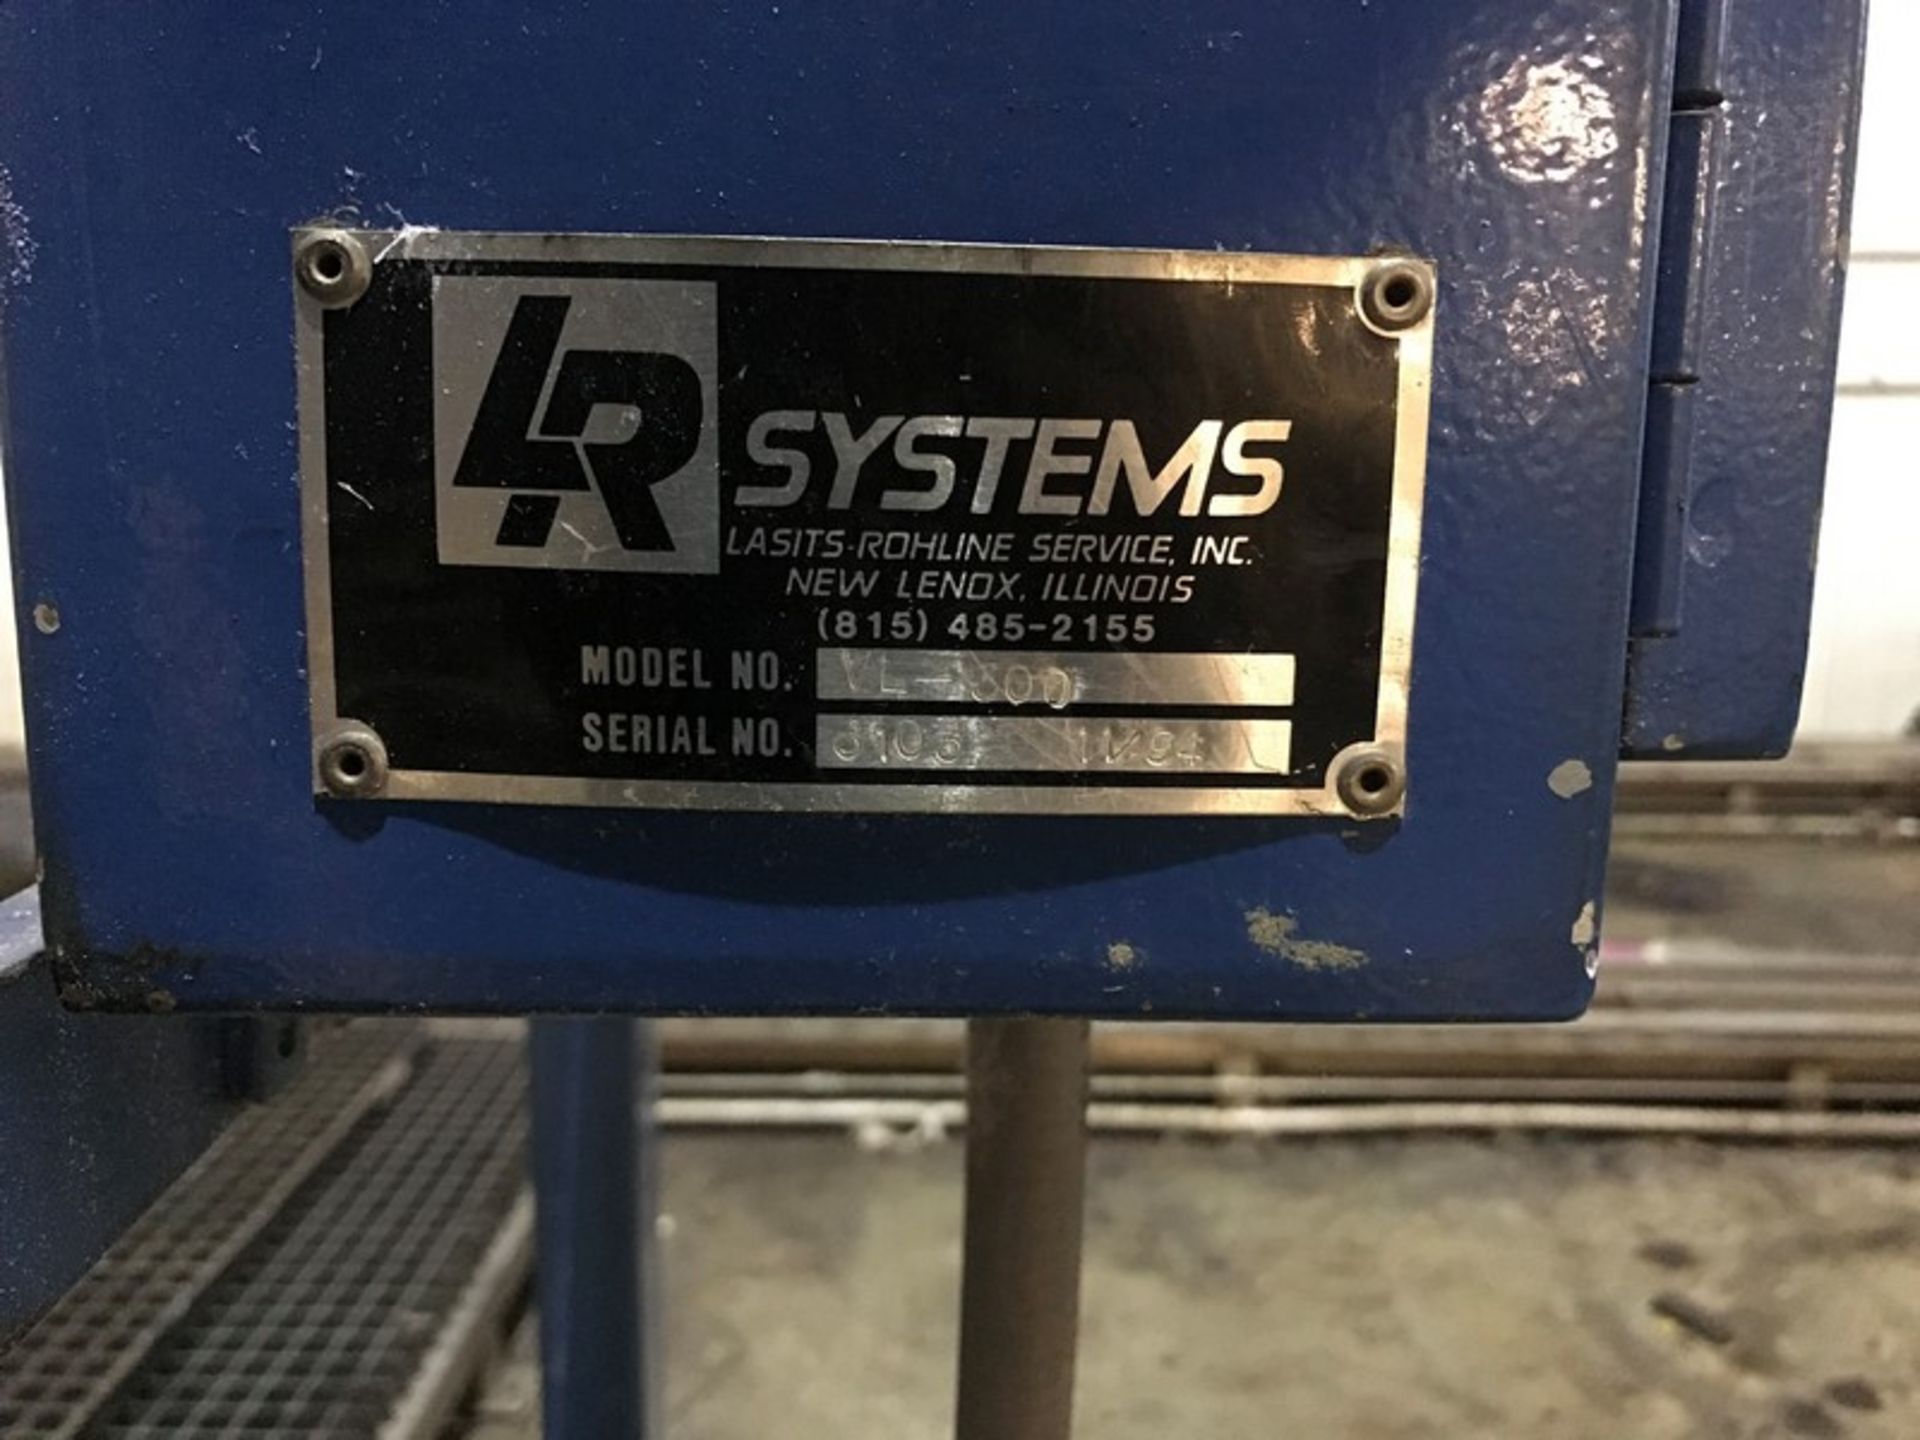 Roots Blower Package, Model VL-30D, S/N 6103 - 1V94 by LR Systems, Model 33-U-RAL 06L, S/N - Image 3 of 3